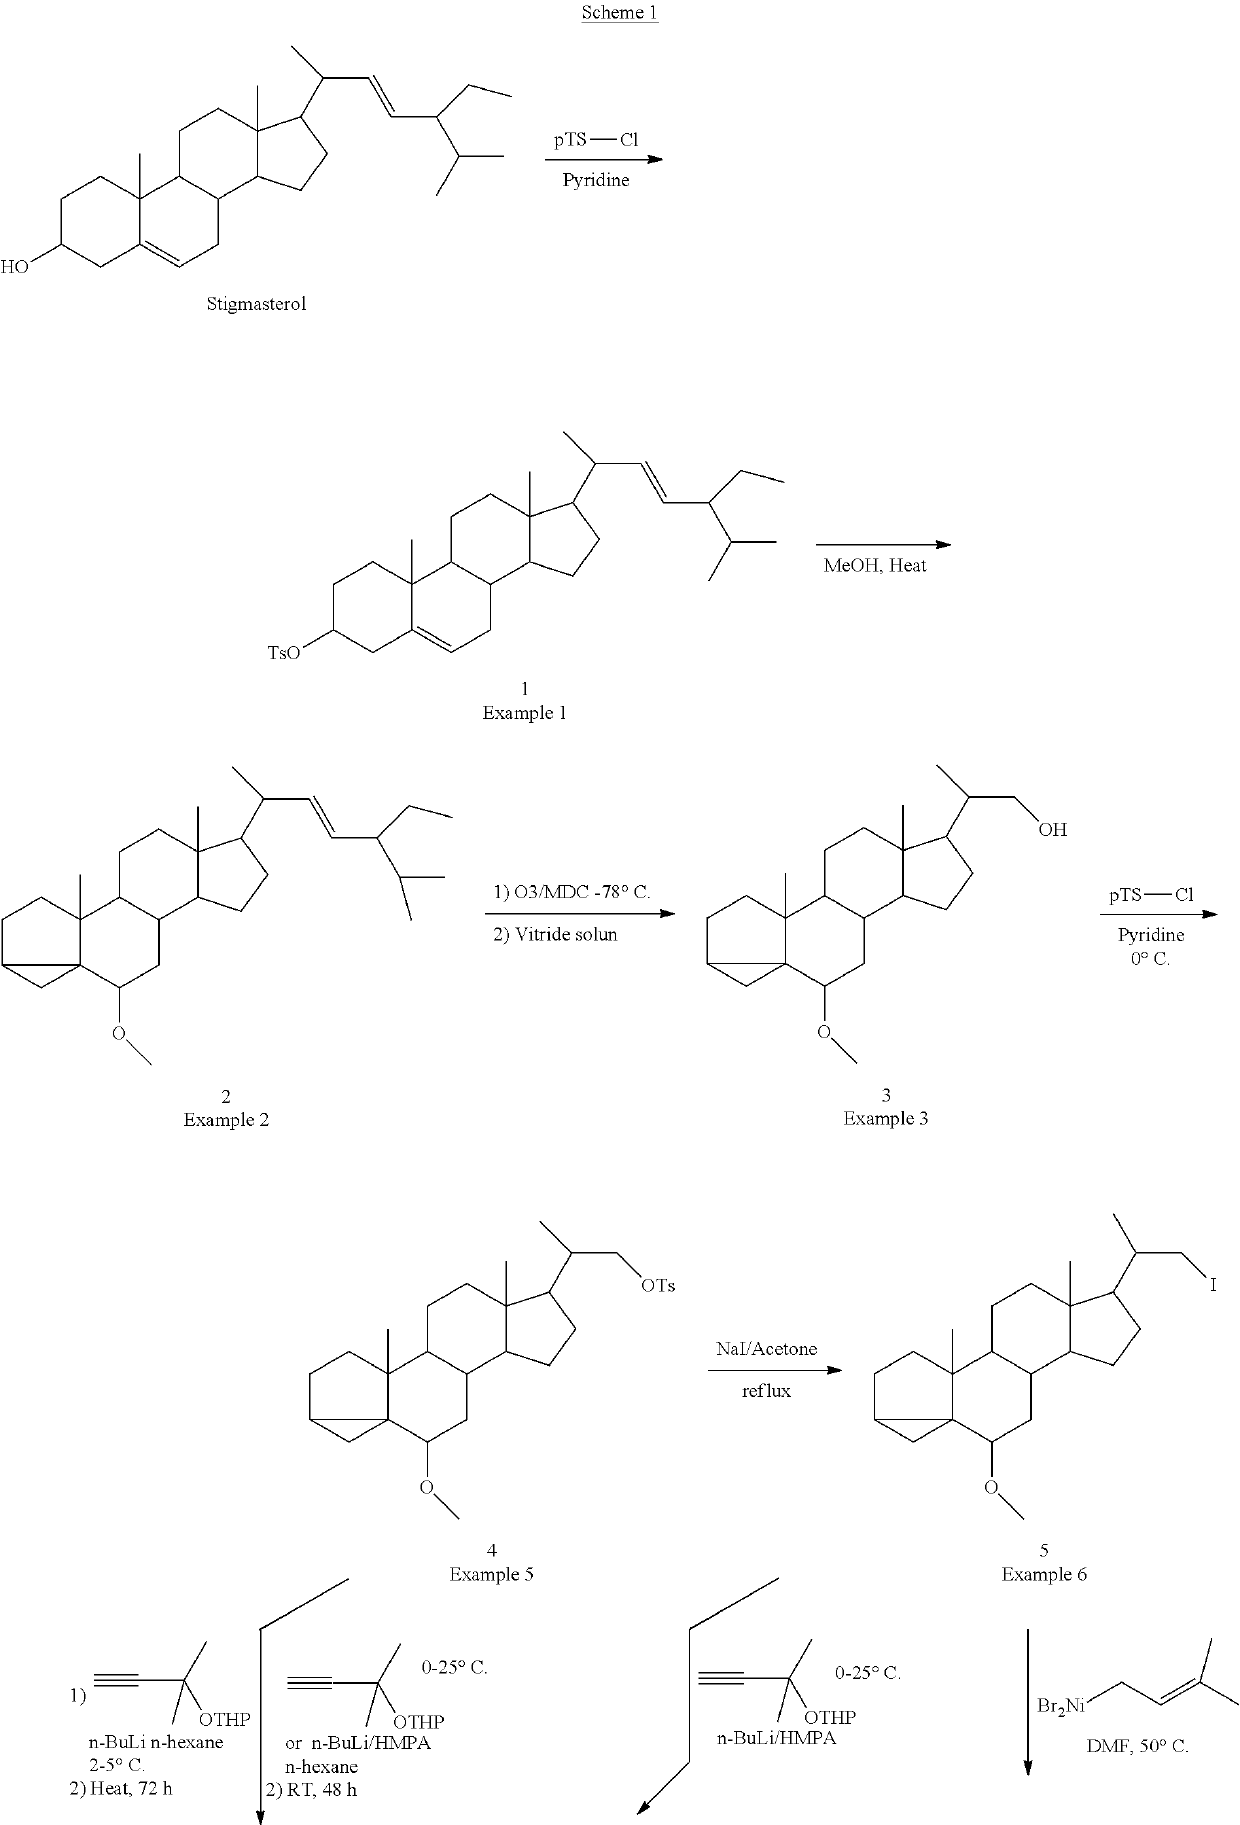 Novel method for synthesizing 25-oh cholesterol/calcifediol from phytosterol